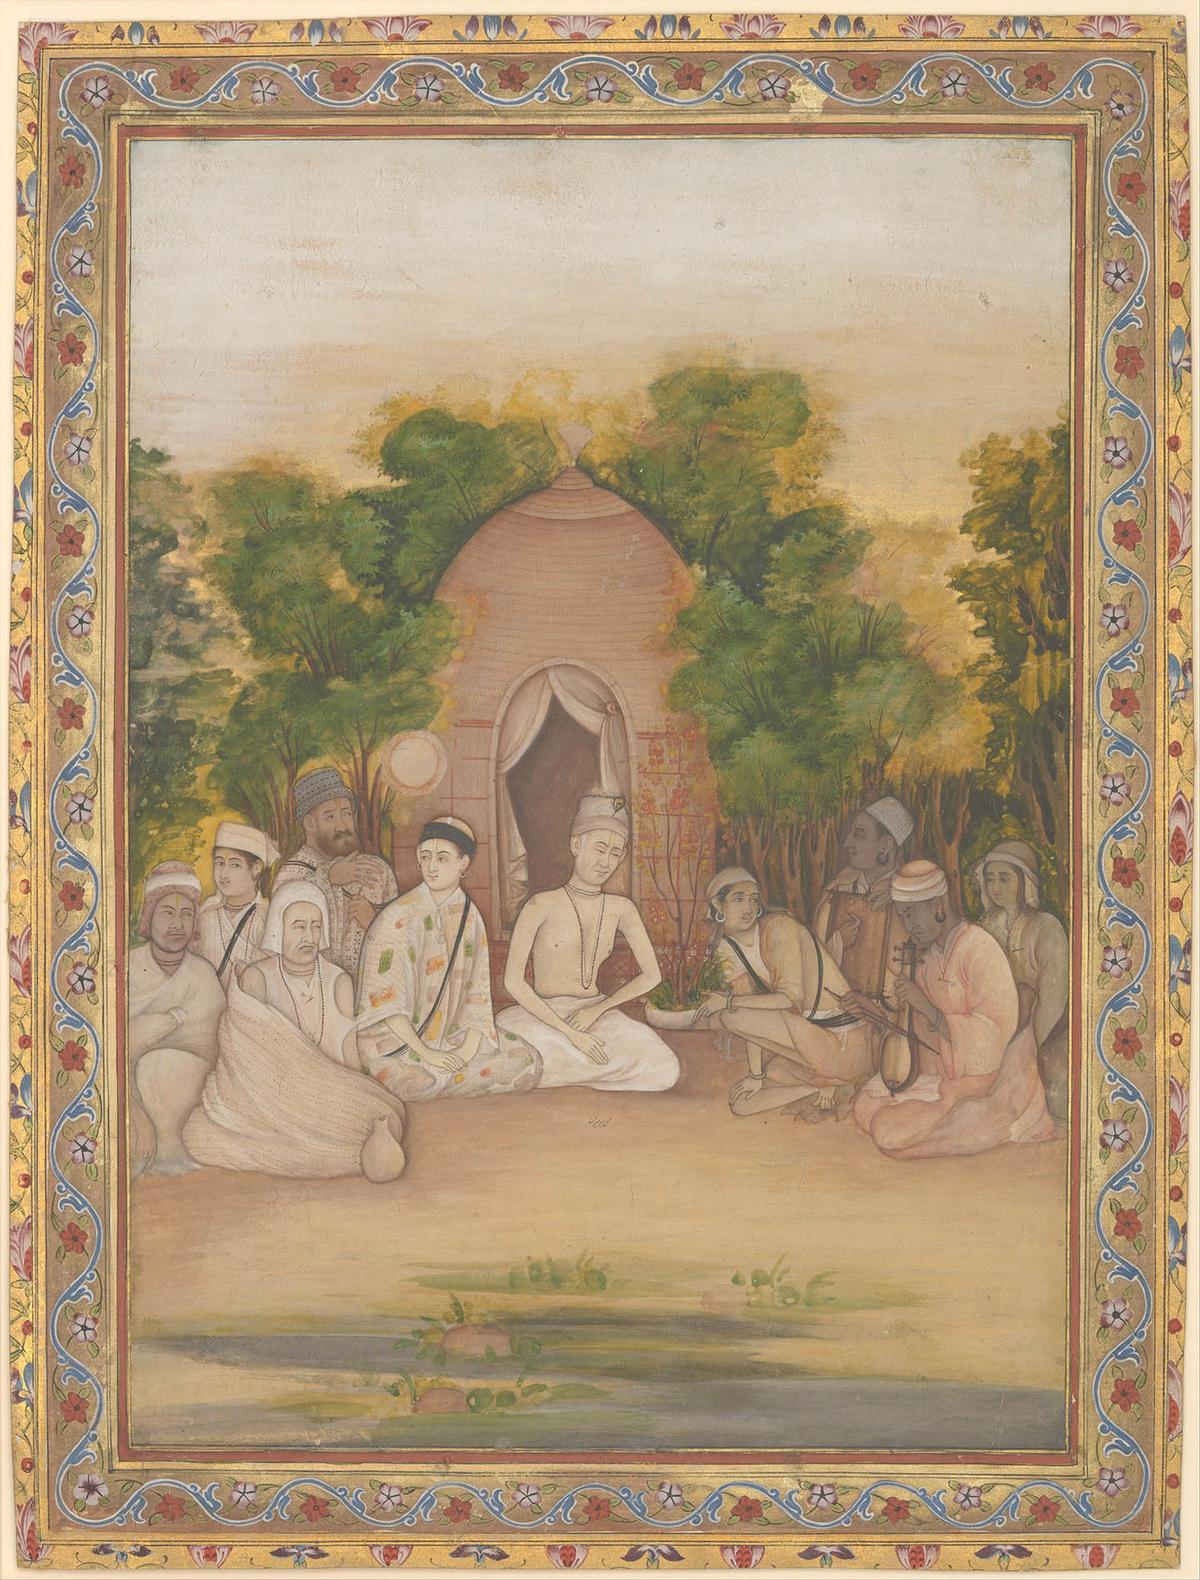 "A Gathering of Holy Men of Different Faiths," circa 1770–1775, by Mir Kalan Khan. Watercolor and gold on paper. The Metropolitan Museum of Art, New York City. (Public Domain)